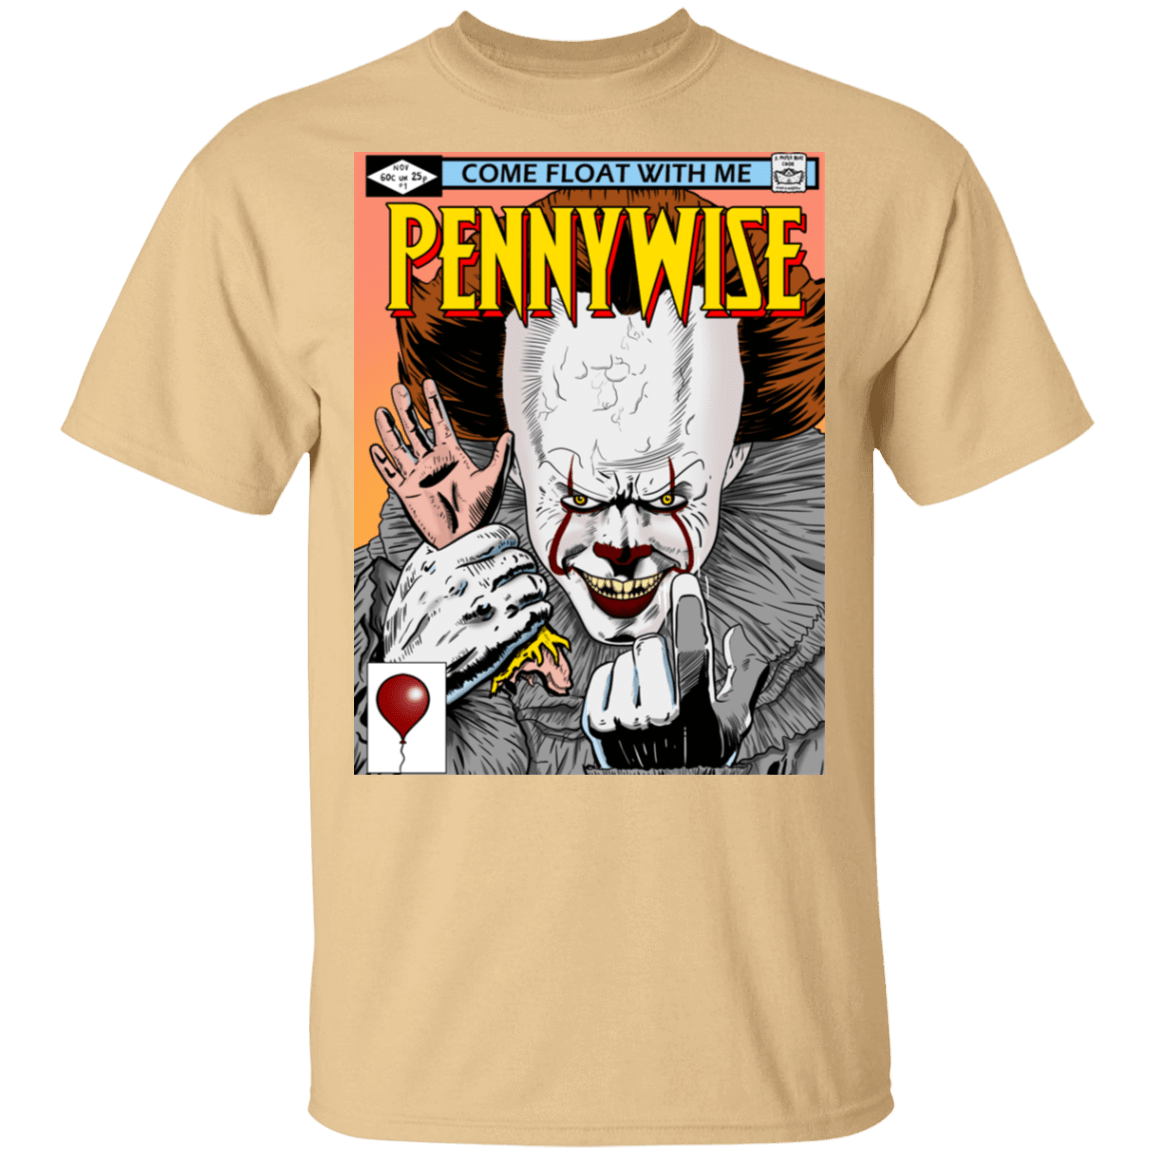 T-Shirts Vegas Gold / S Pennywise 8+ T-Shirt